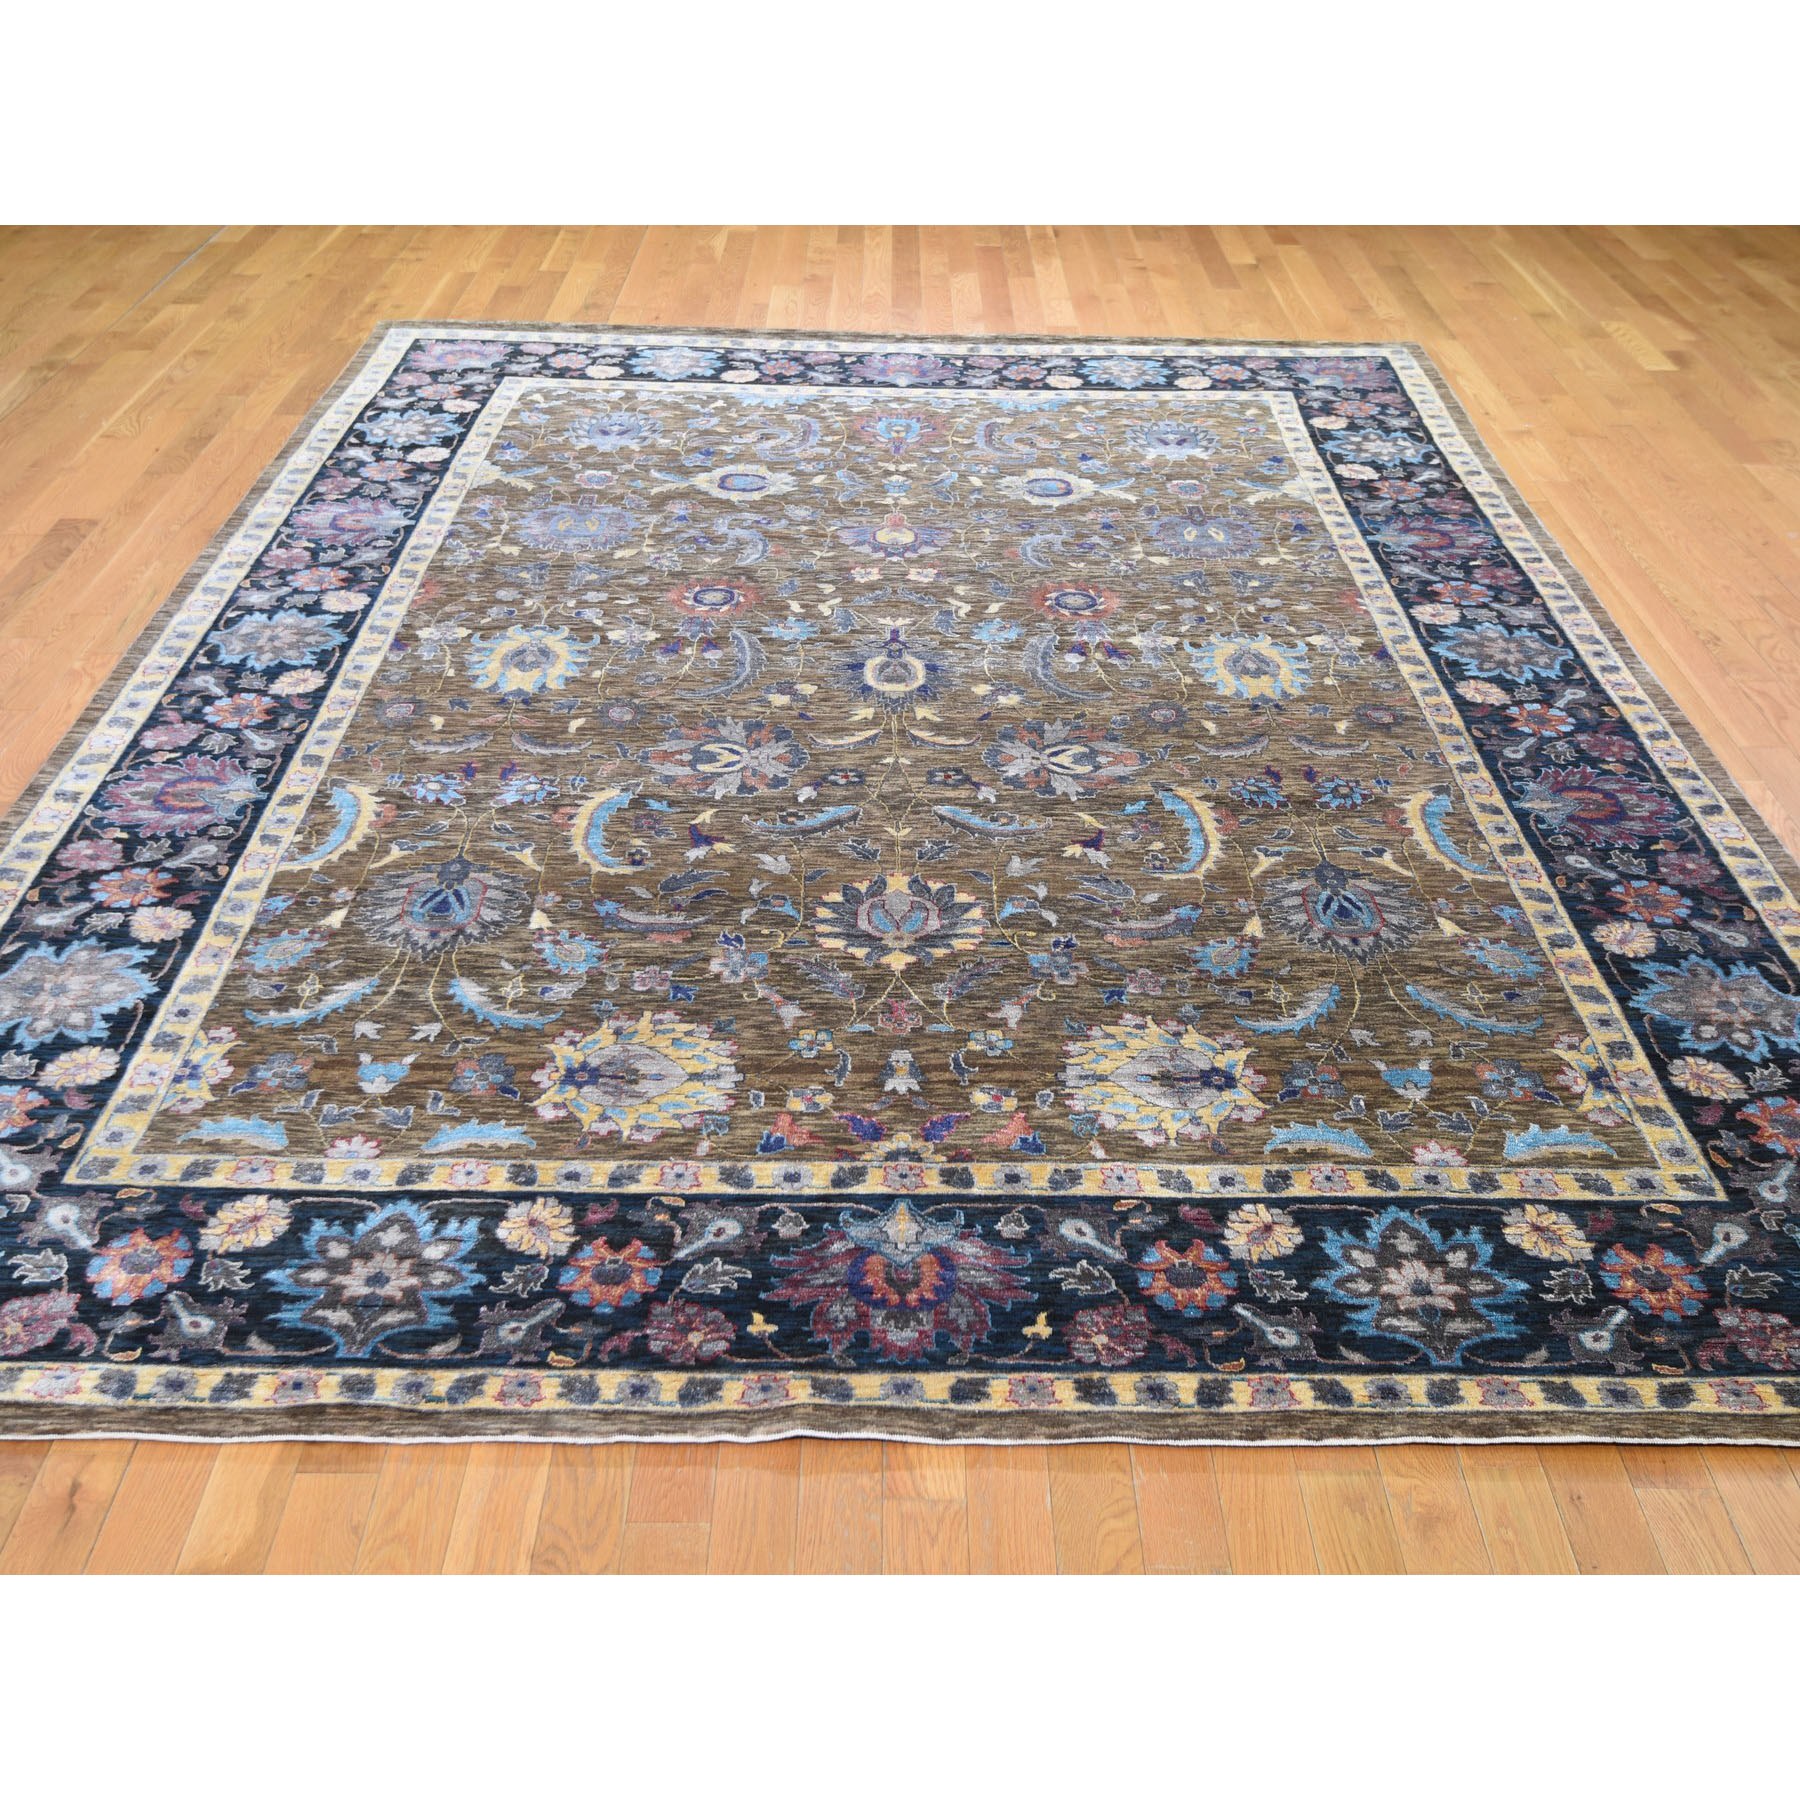 8'10"x12' Brown Silk With Textured Wool Persian Design Hand Woven Oriental Rug 